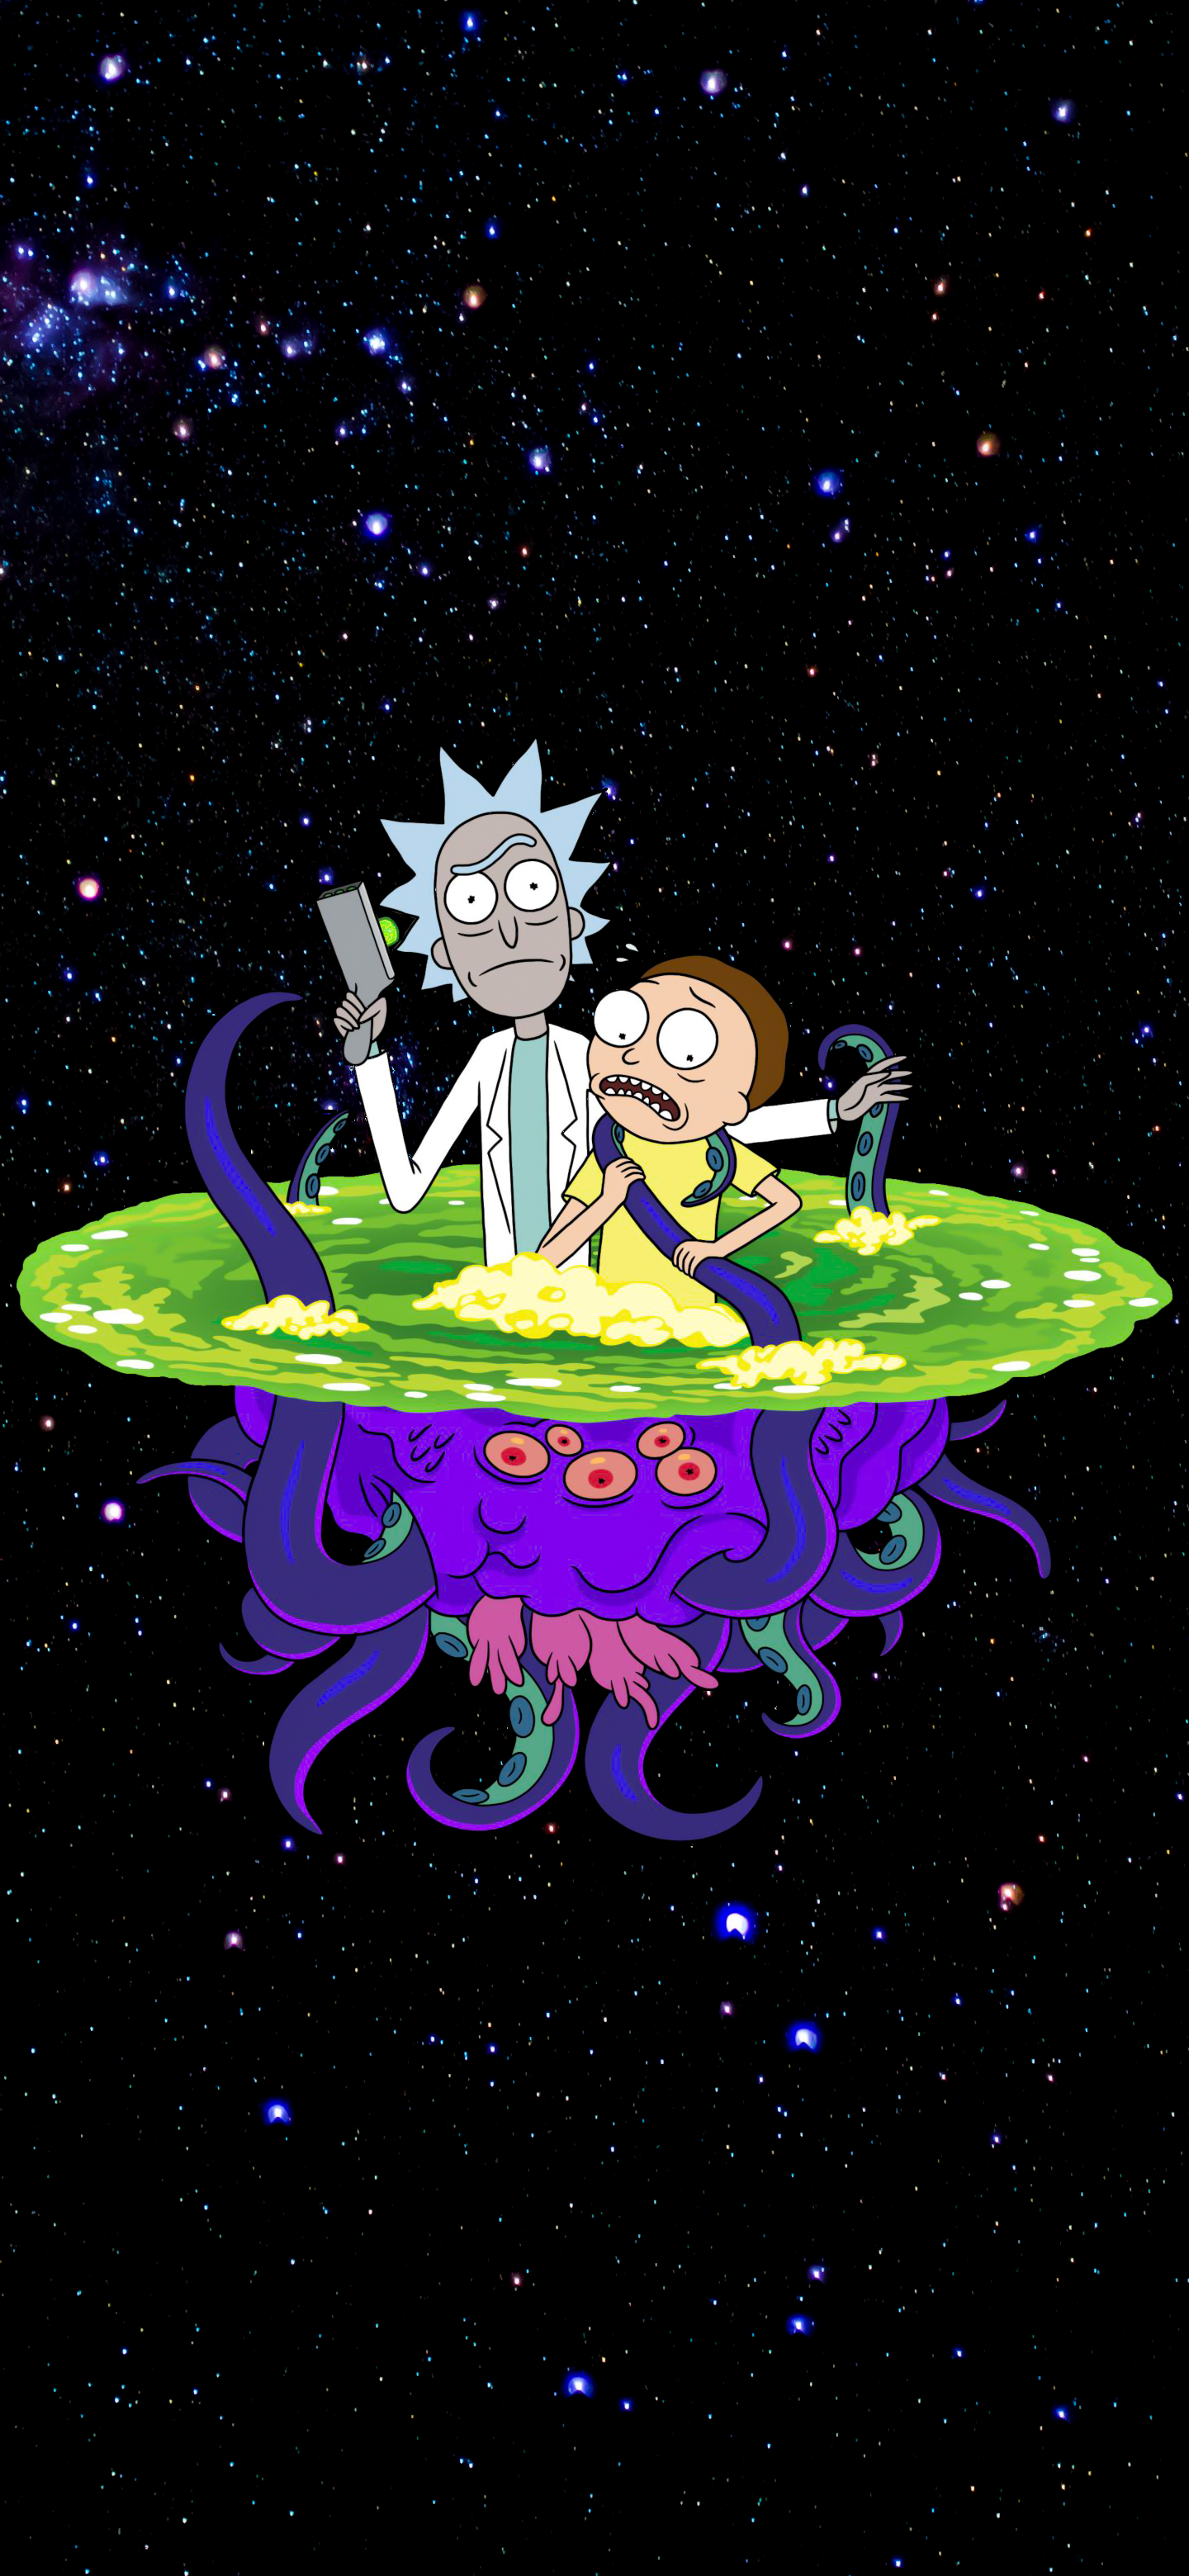 RICK AND MORTY OLED WALLPAPER